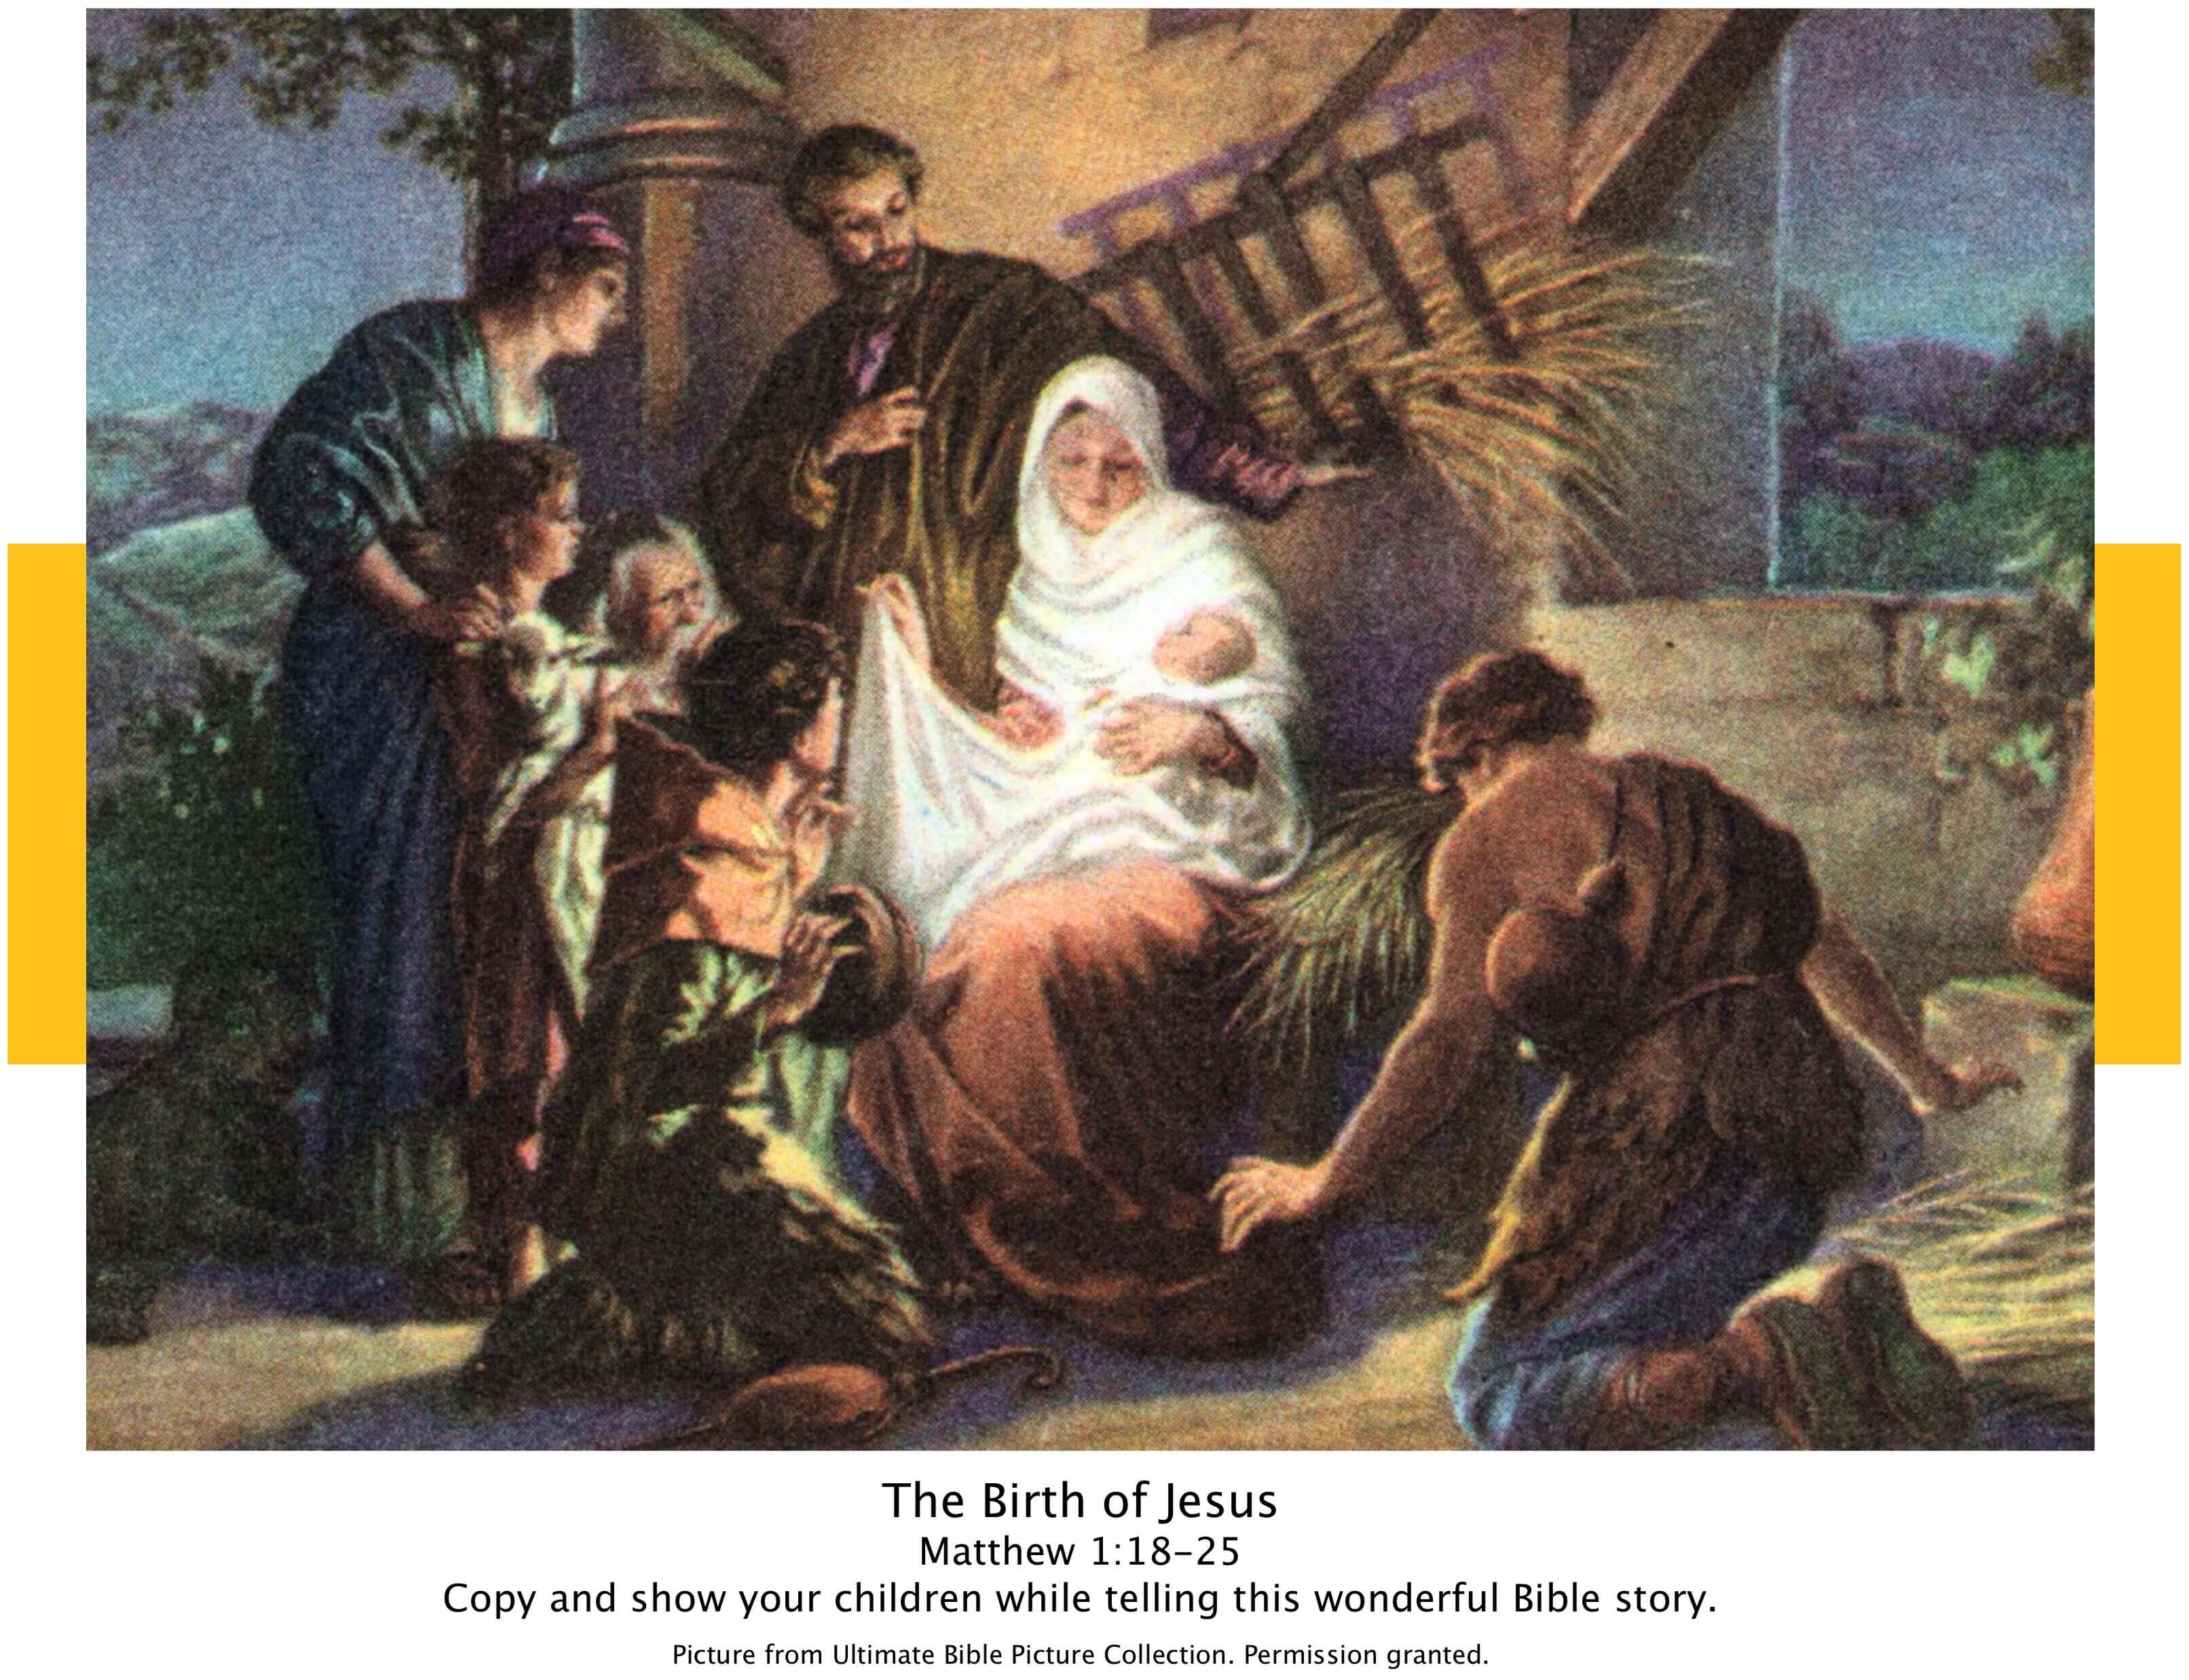 Facts About The Birth Of Jesus Christ